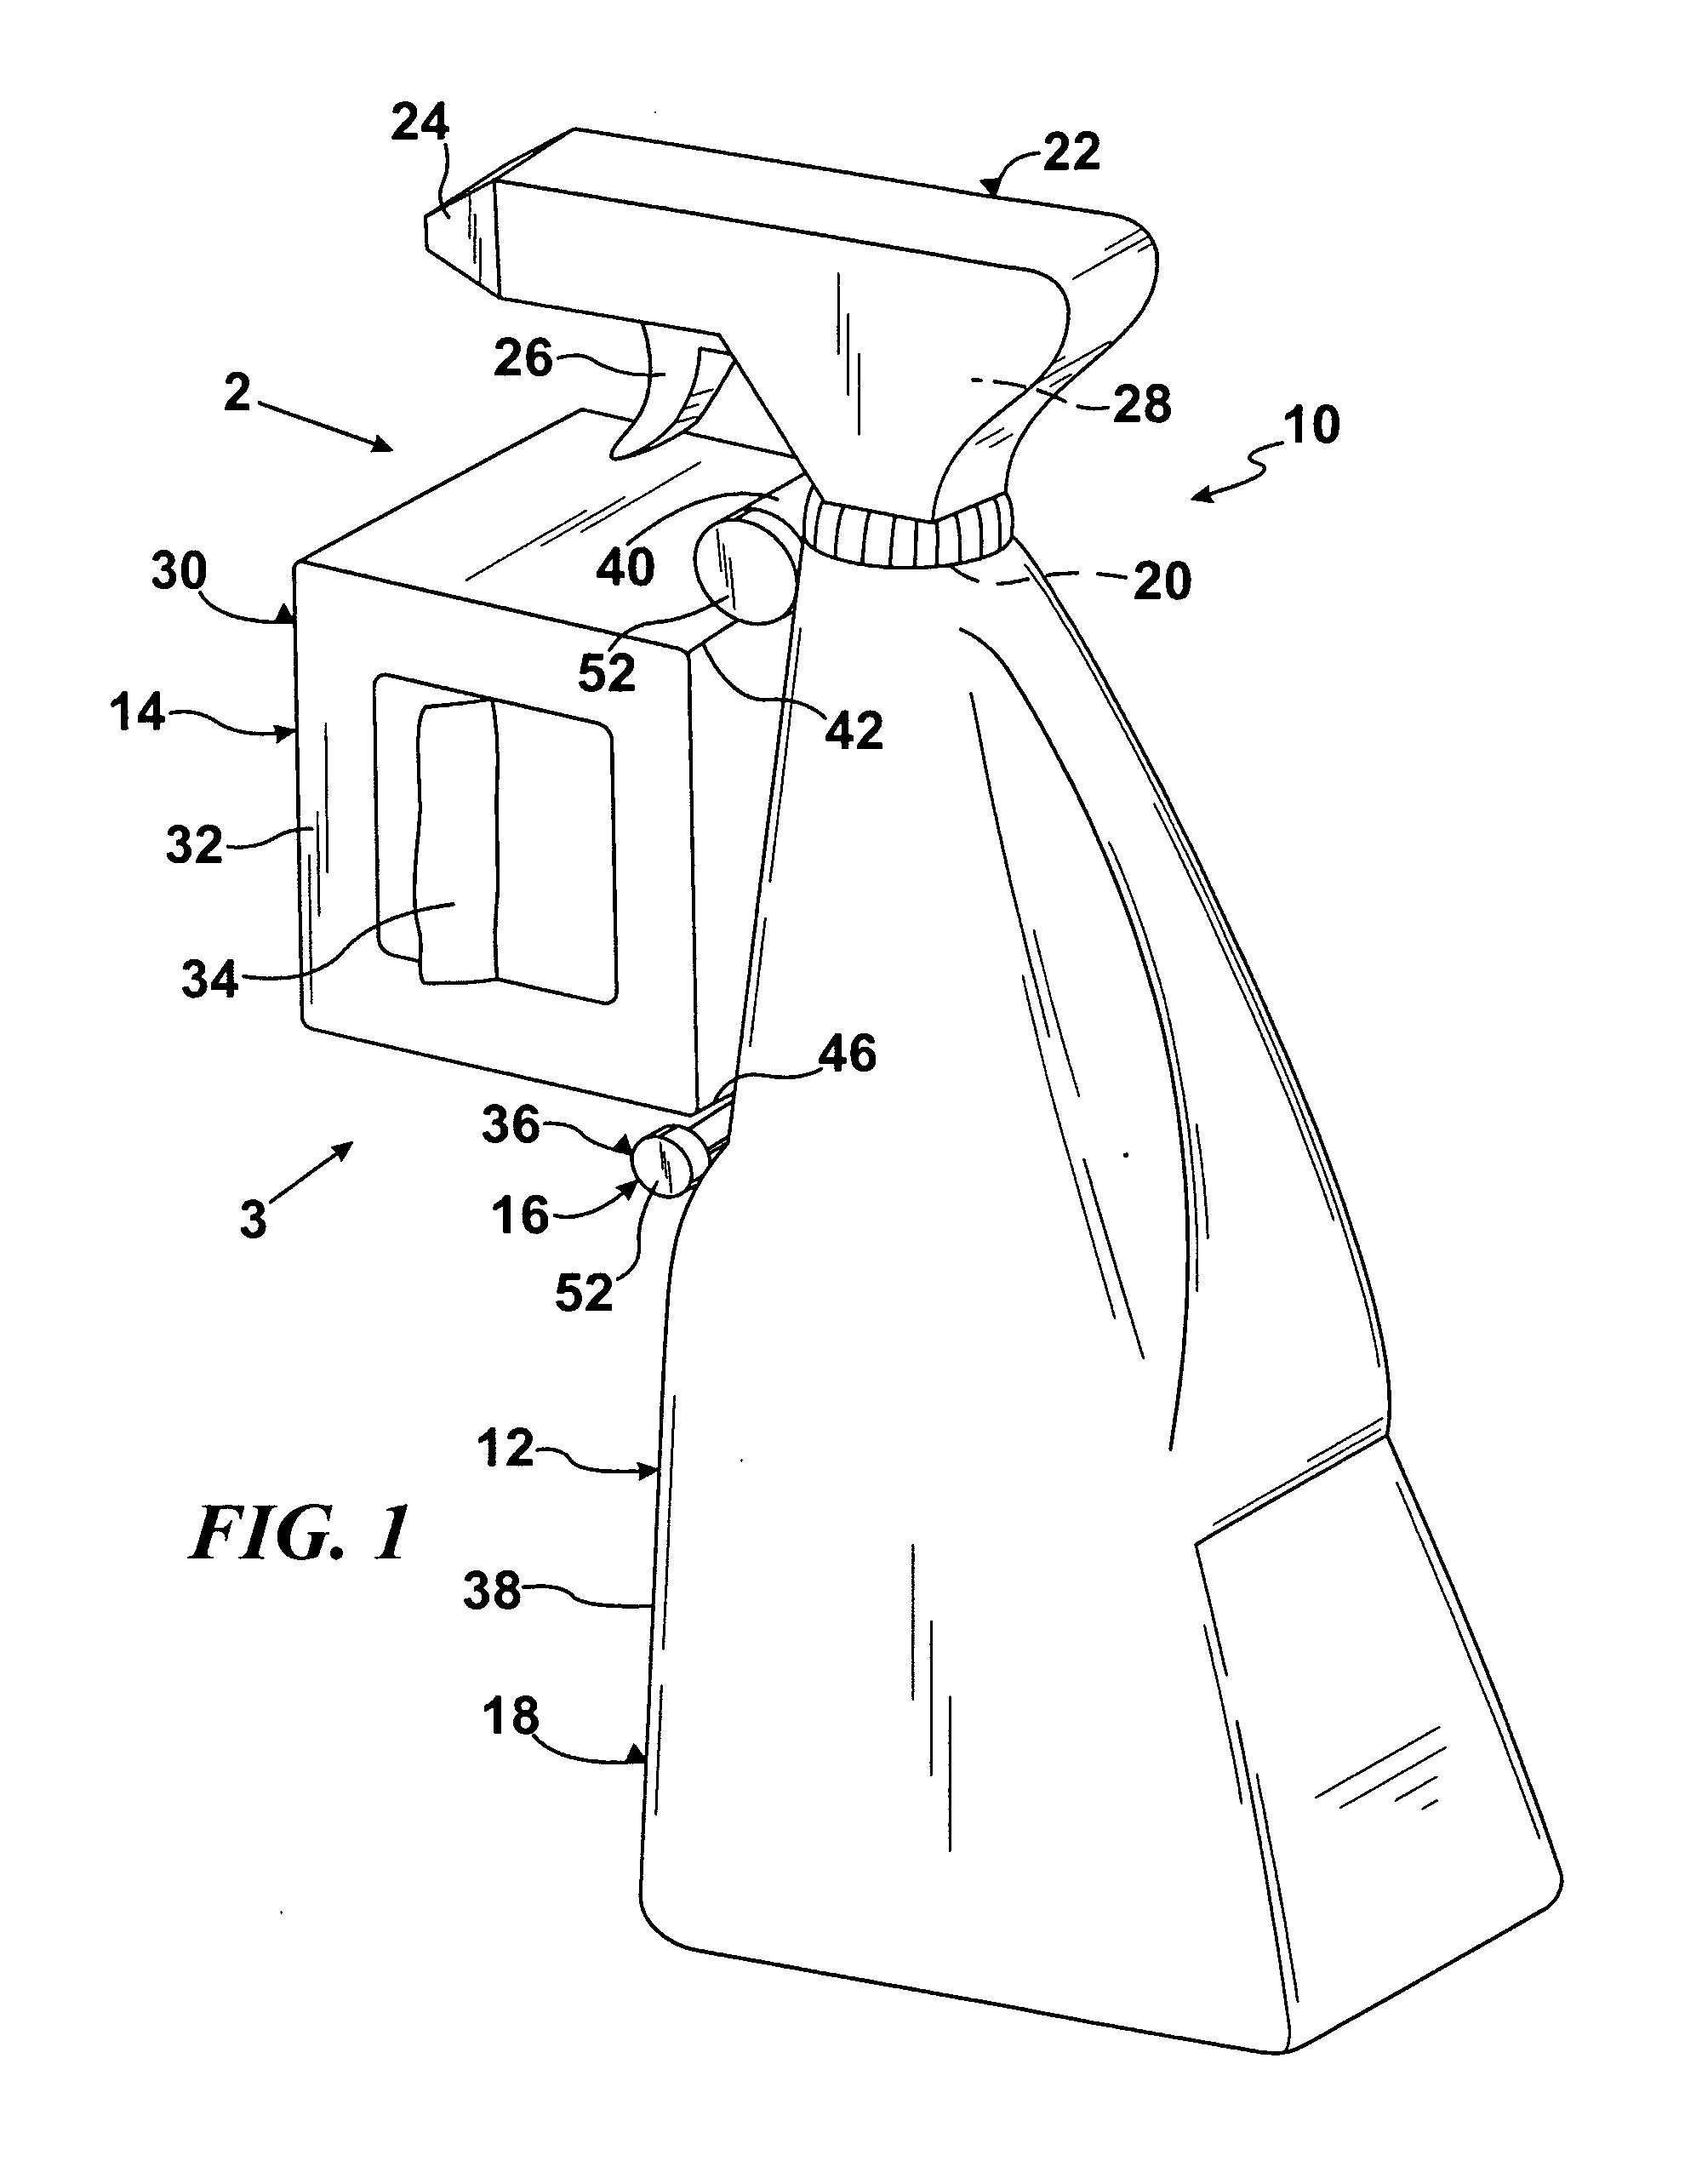 Combined spray container and wipe dispensing device